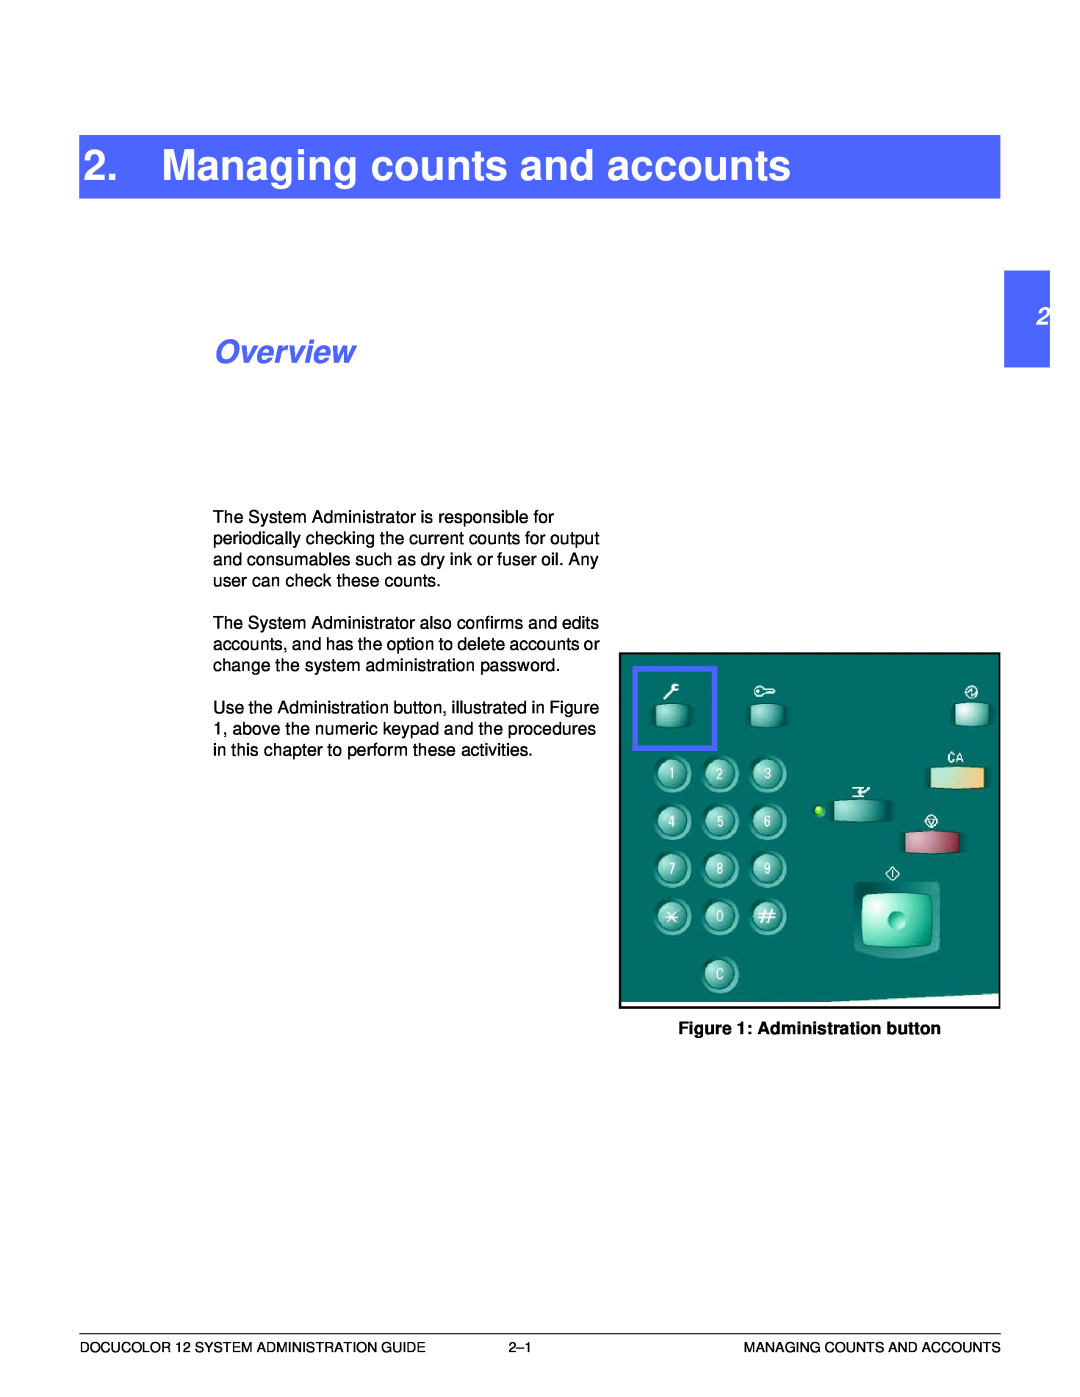 Xerox a2 manual Managing counts and accounts, Overview, 1 2 3 4 5 6 7, Administration button 